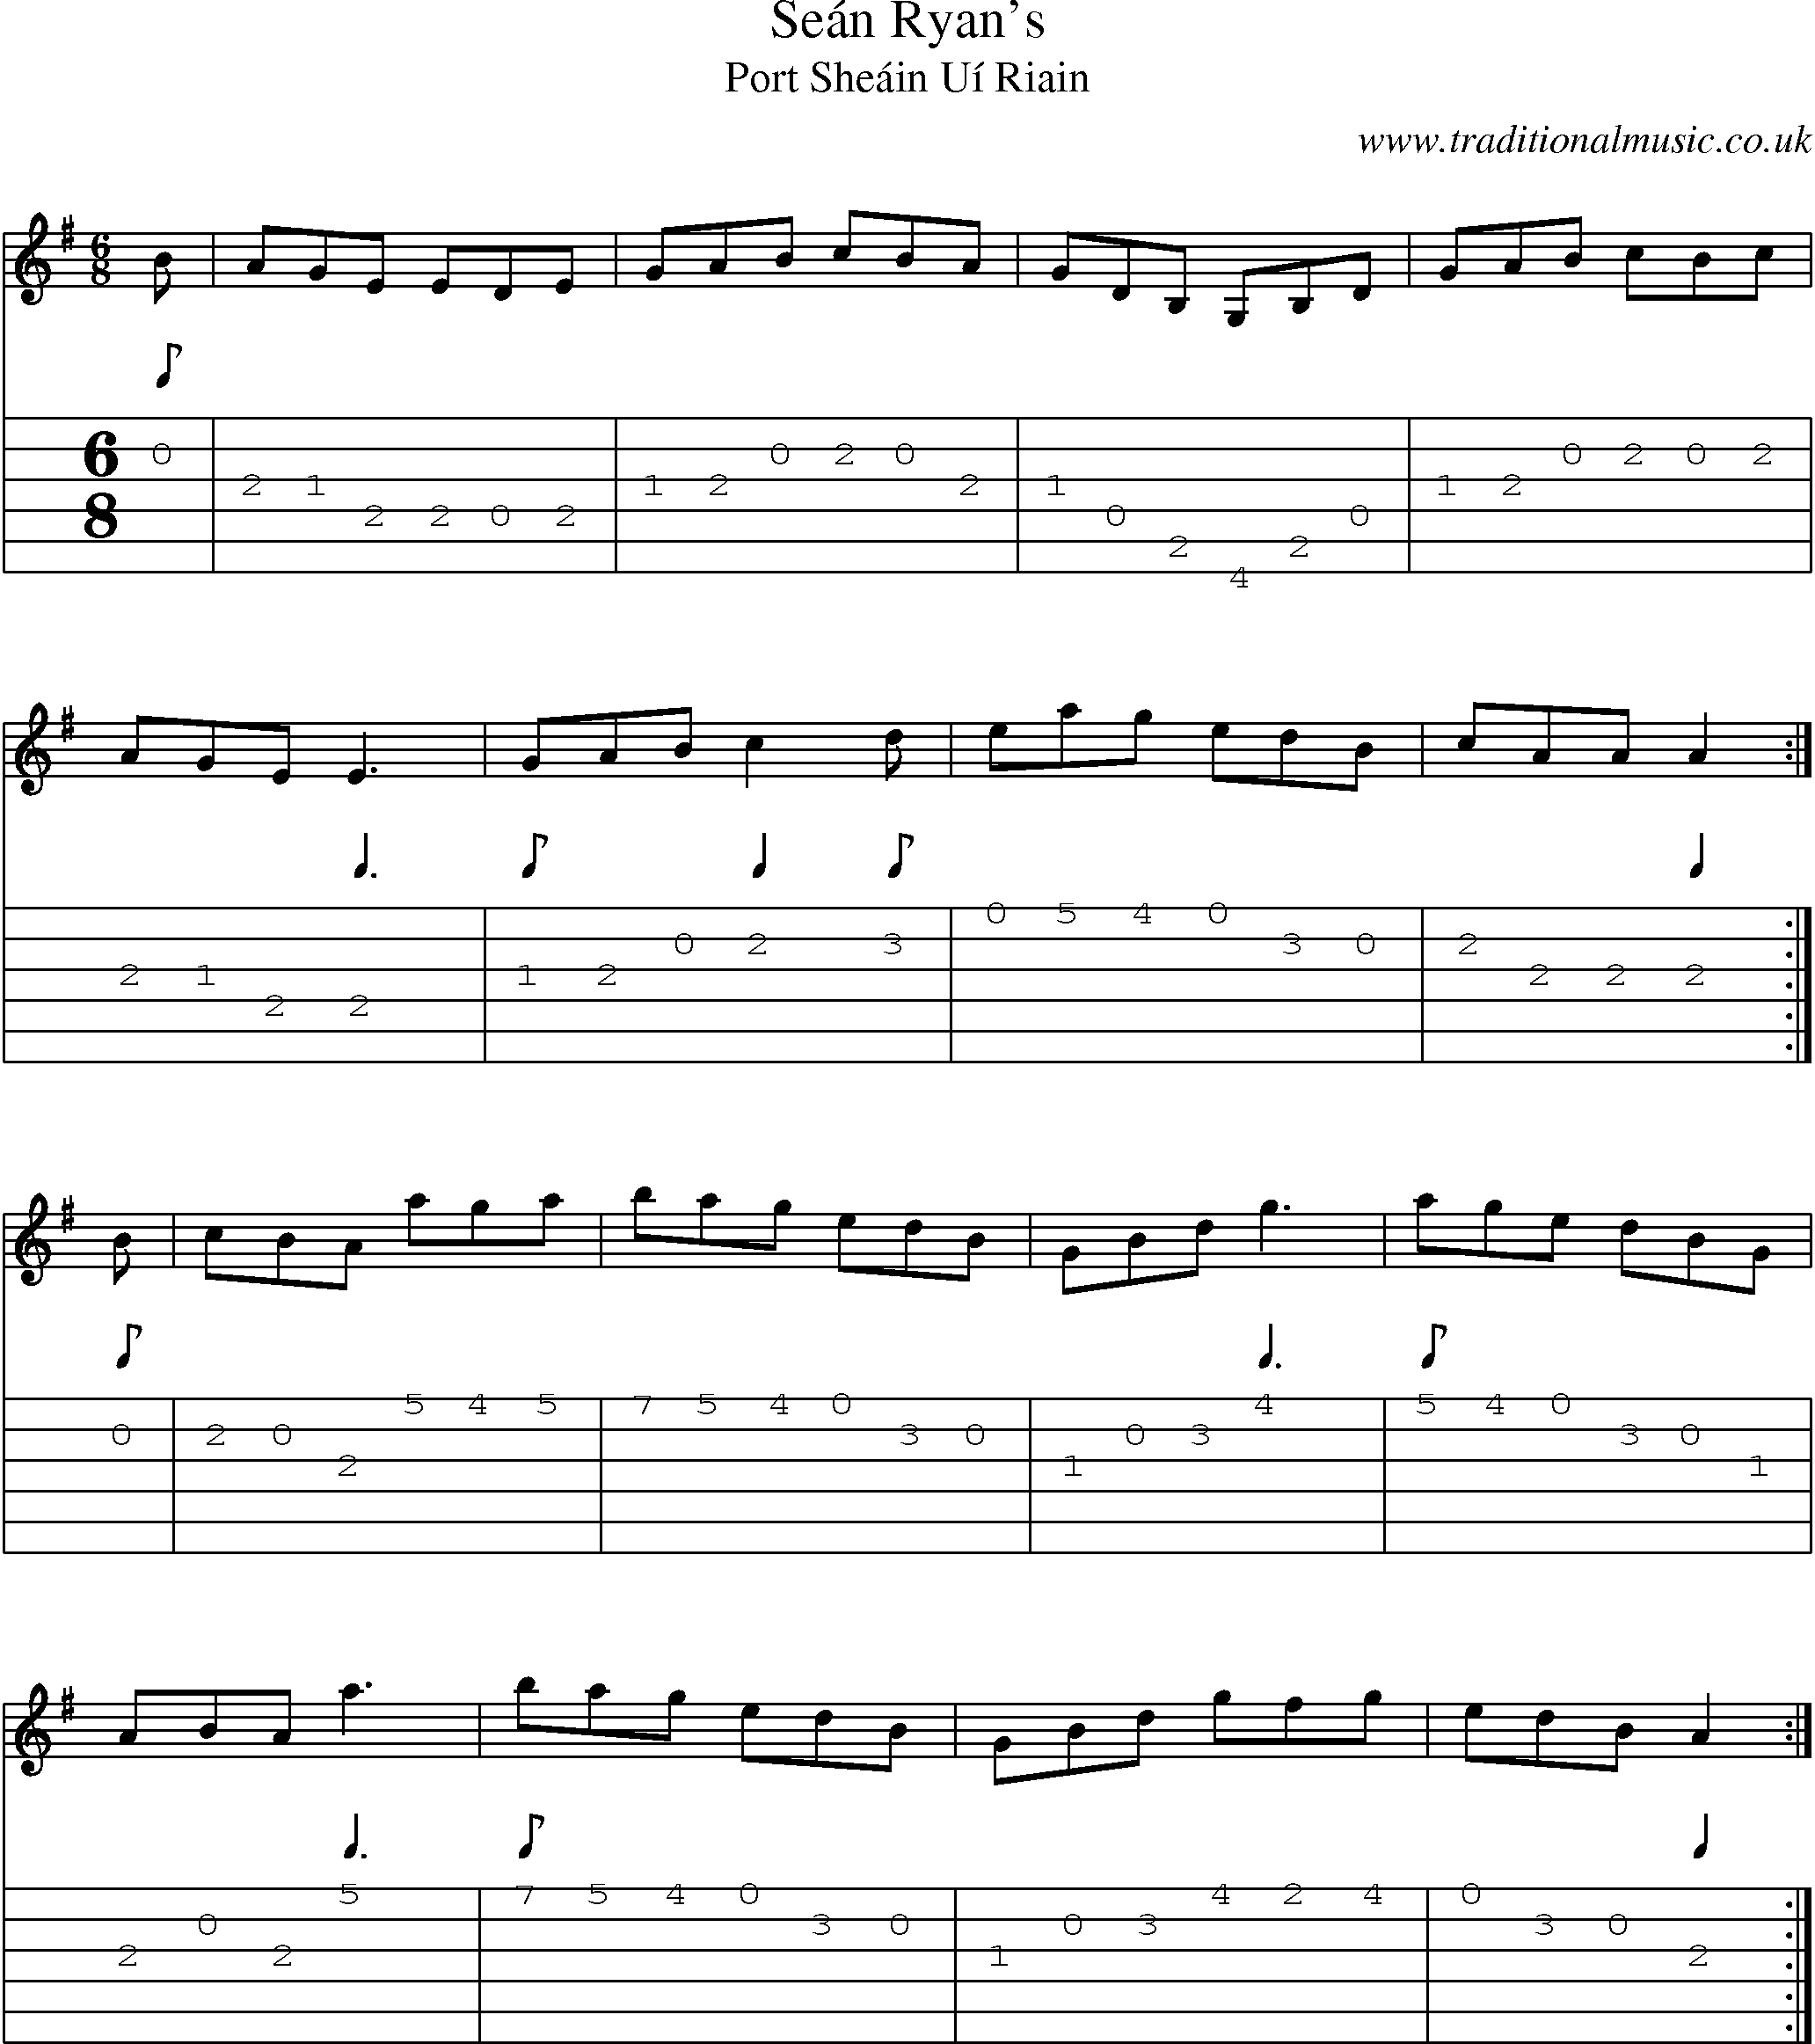 Music Score and Guitar Tabs for Sean Ryans